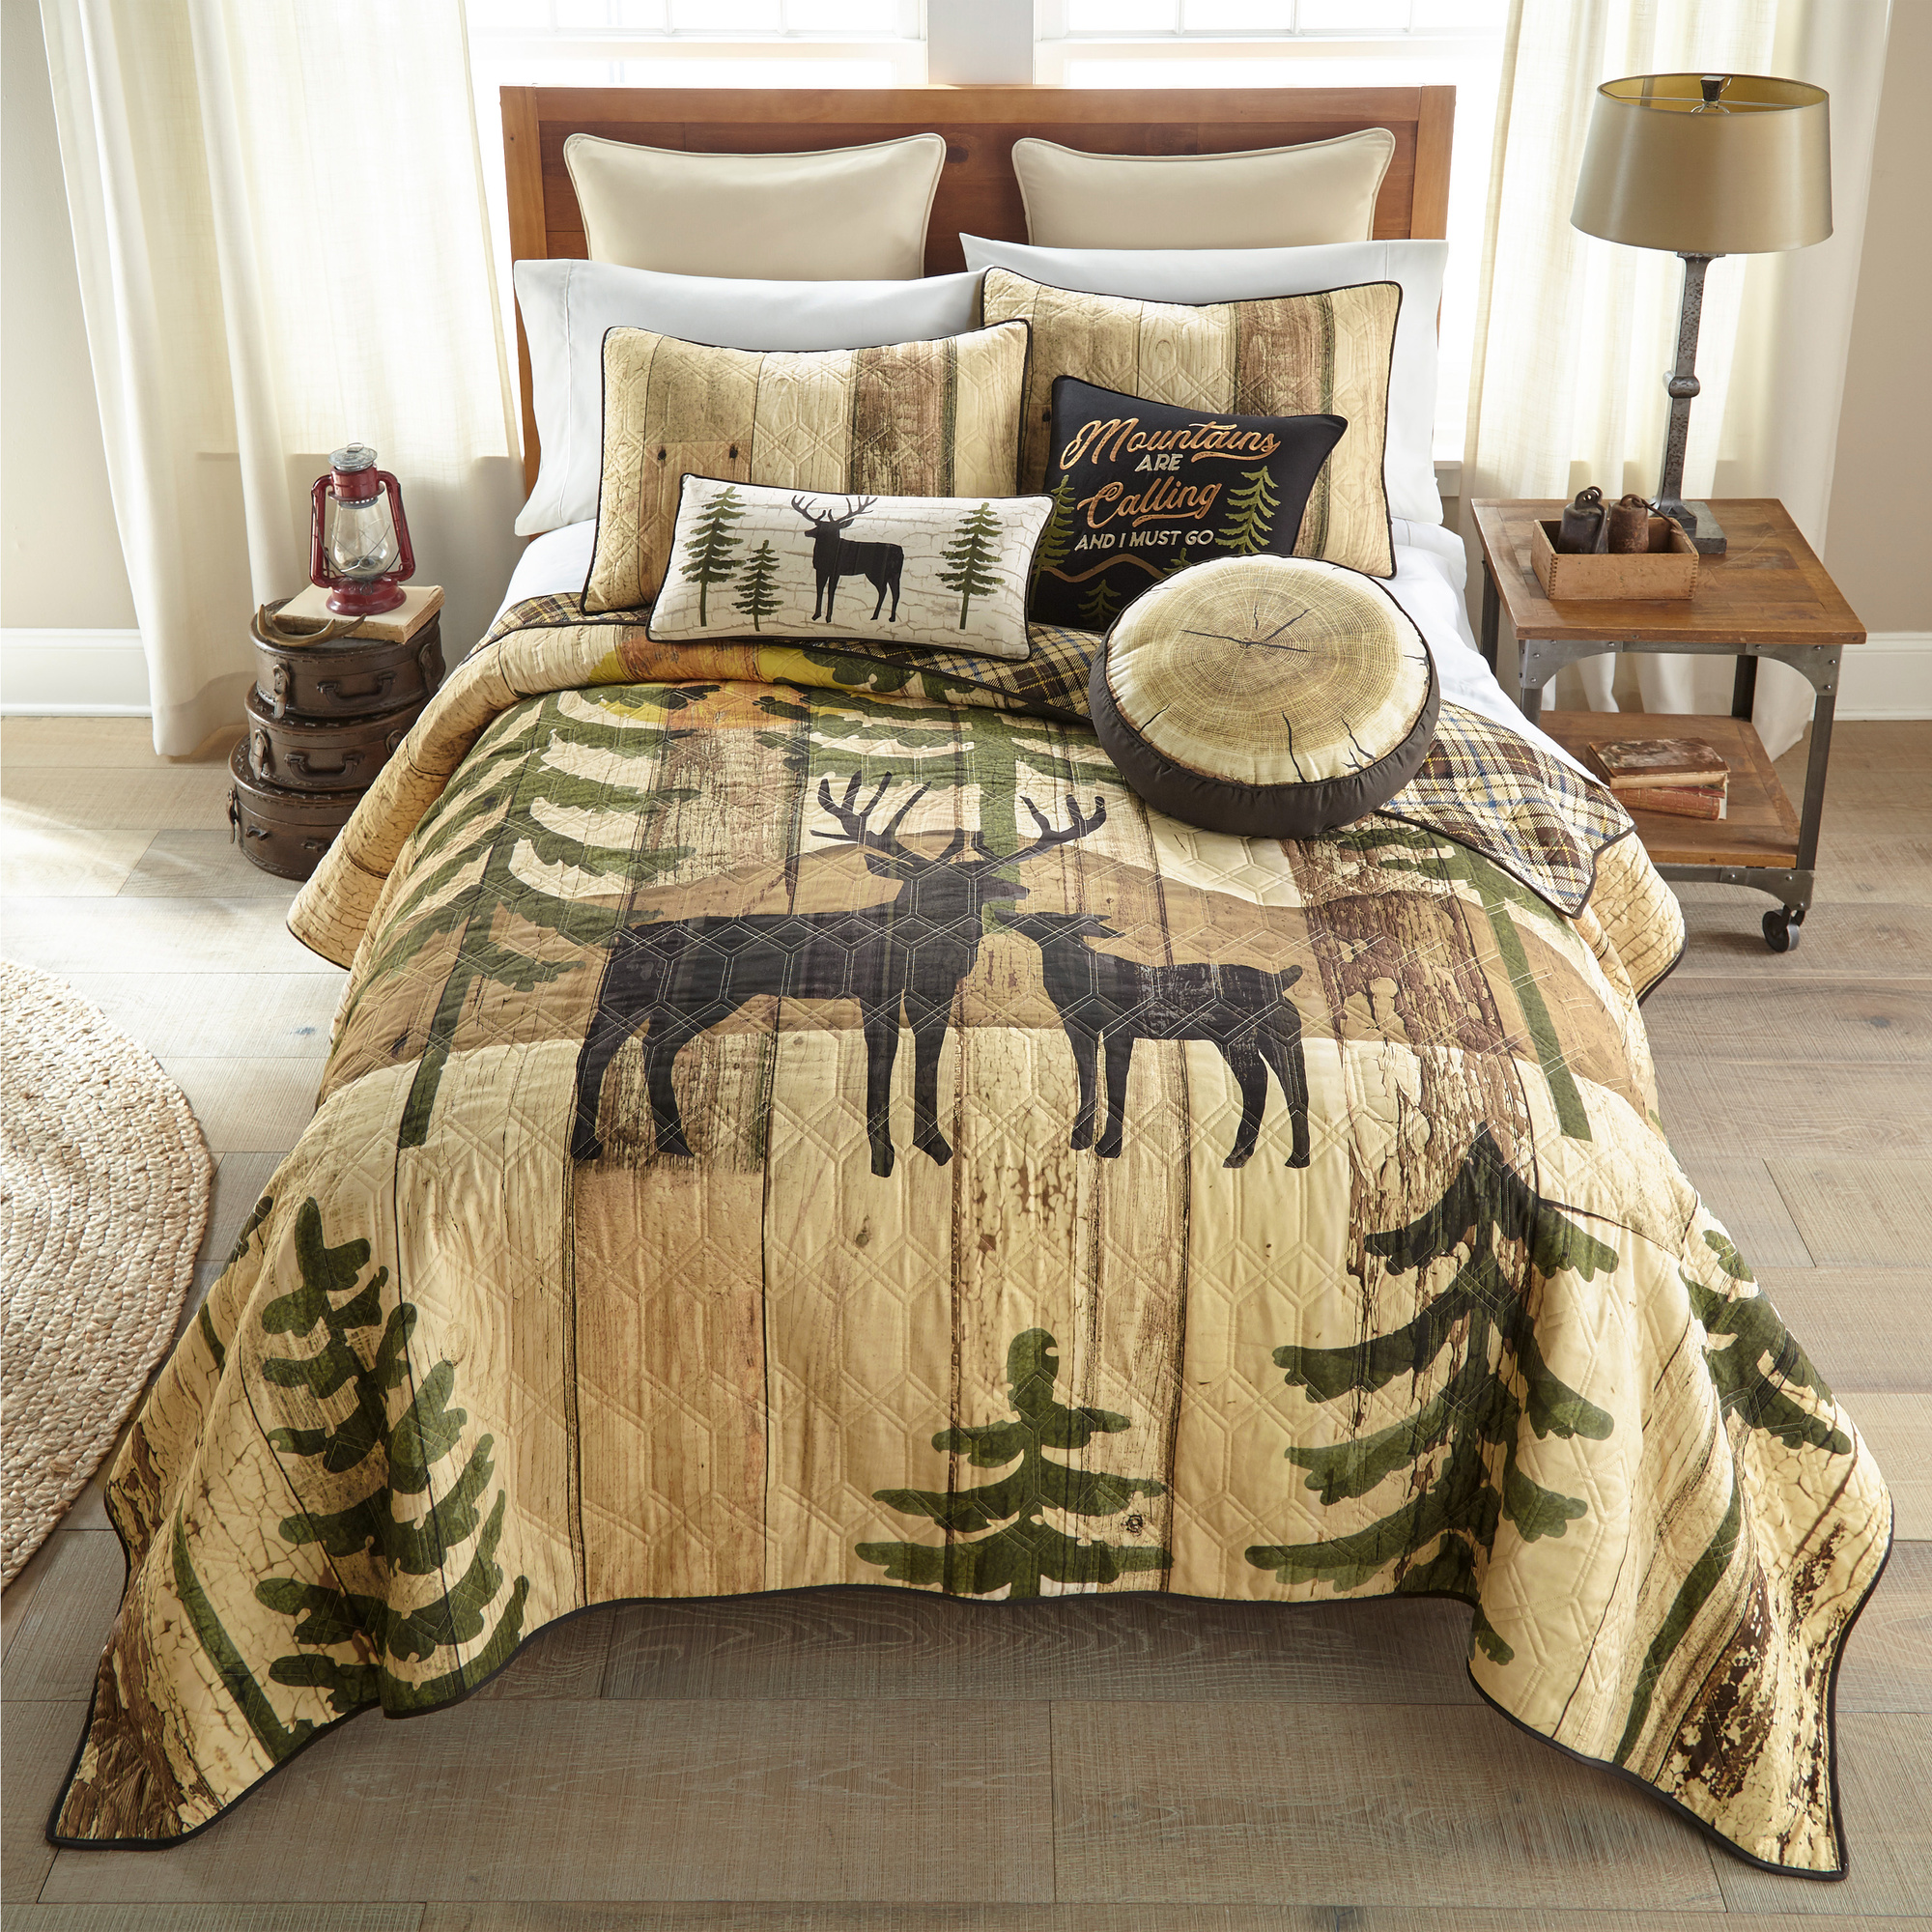 Donna Sharp Painted Deer Quilted Bedding Set